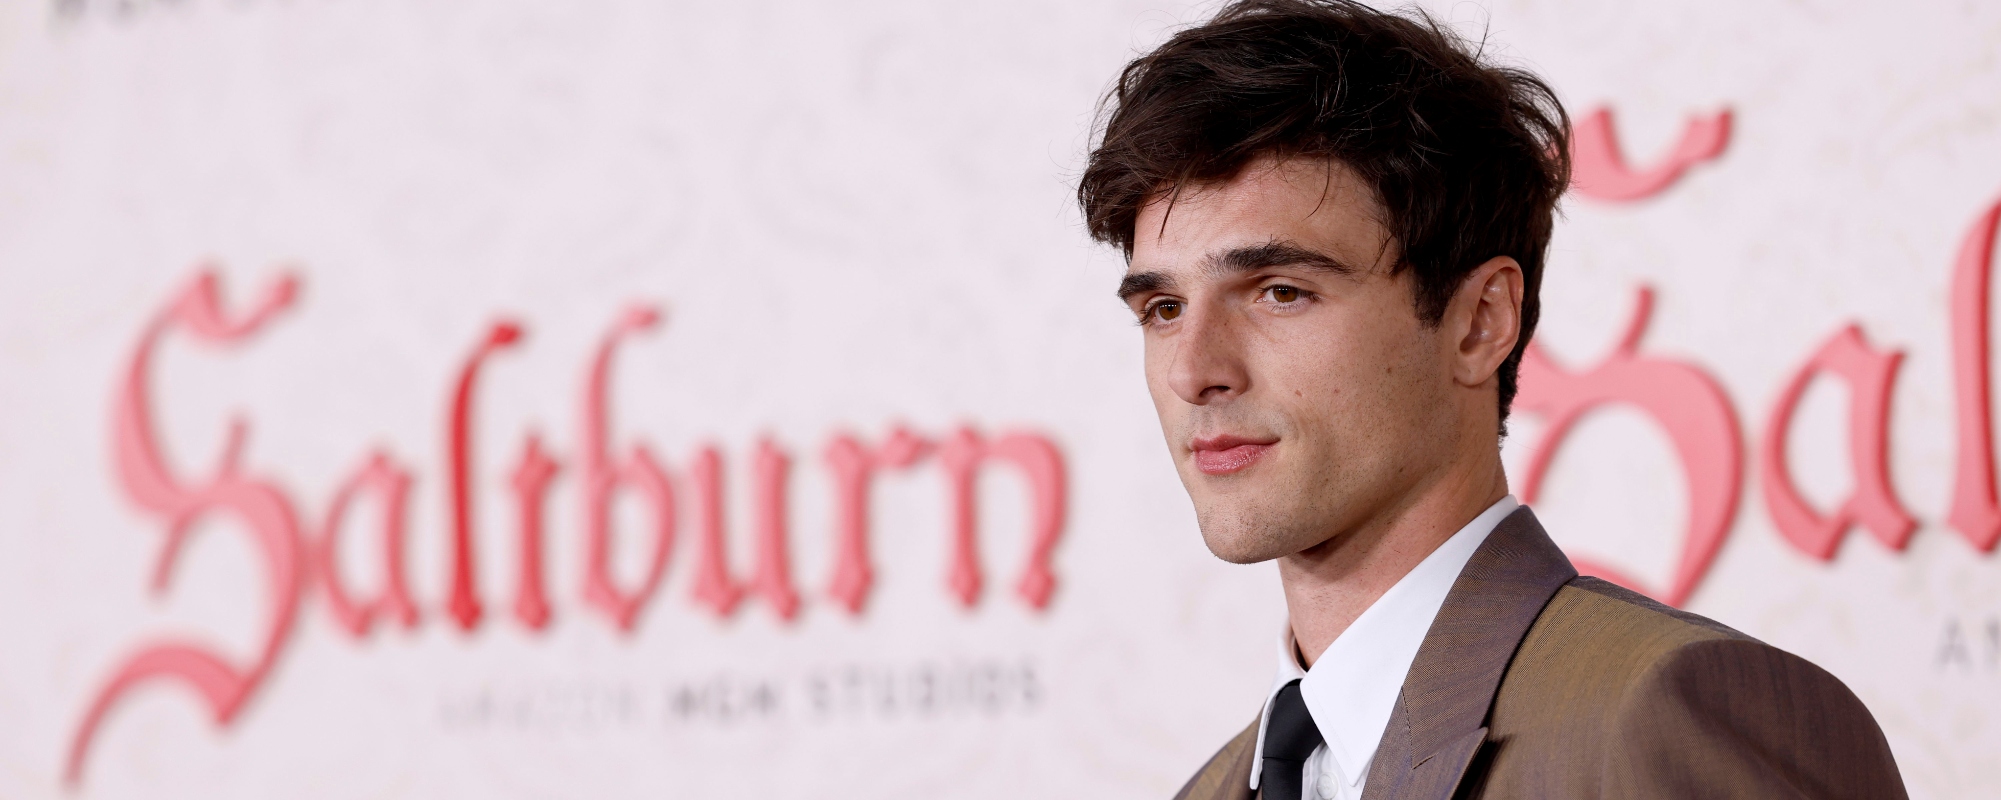 ‘Saltburn’ Star Jacob Elordi Talks His Love for David Bowie & Drawing Inspiration from Bon Iver